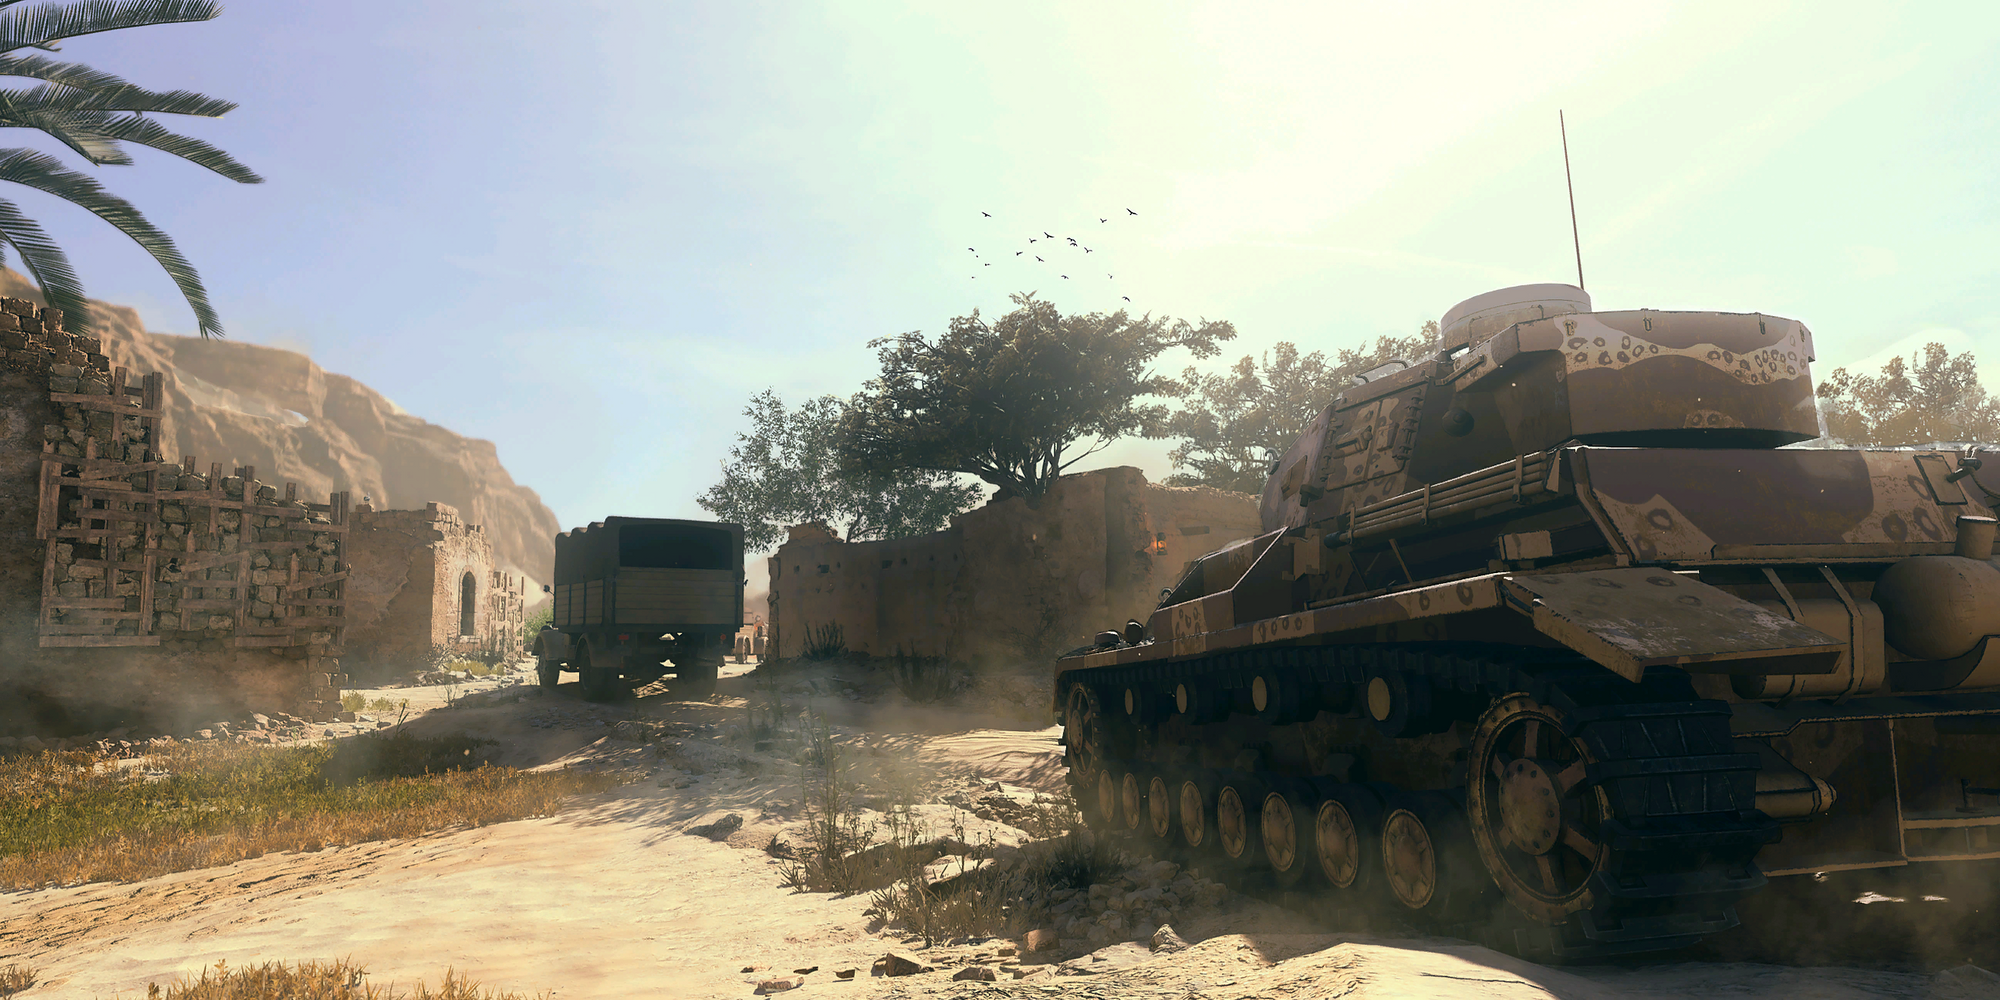 Call of Duty: Vanguard maps - Full list of multiplayer maps in the